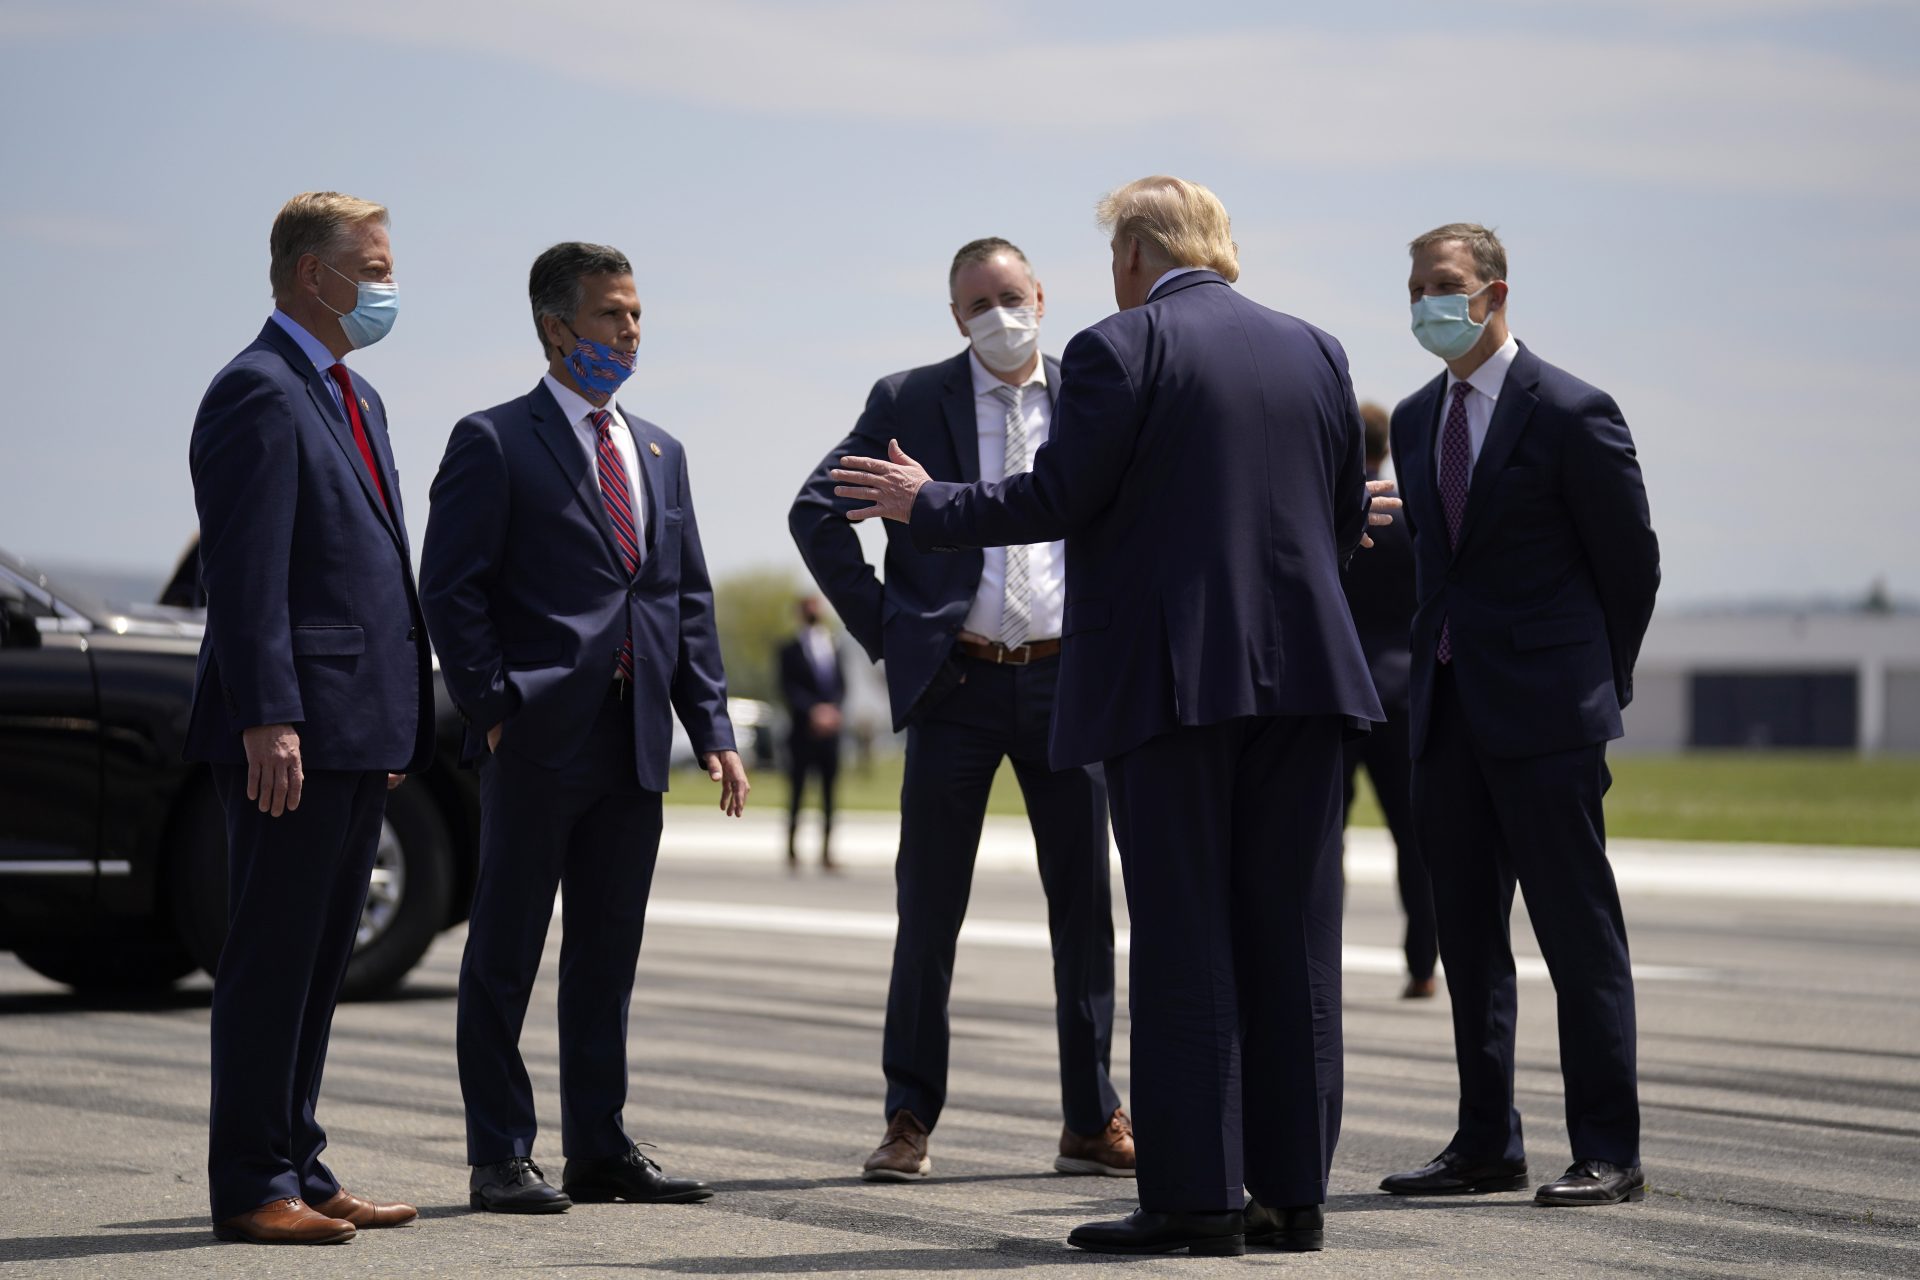 FILE PHOTO: President Donald Trump, second from right, speaks with from left, Rep. Fred Keller, Rep. Dan Meuser, Rep. Brian Fitzpatrick, Rep. Scott Perry after arriving at Lehigh Valley International Airport in Allentown, Pa., Thursday, May 14, 2020.